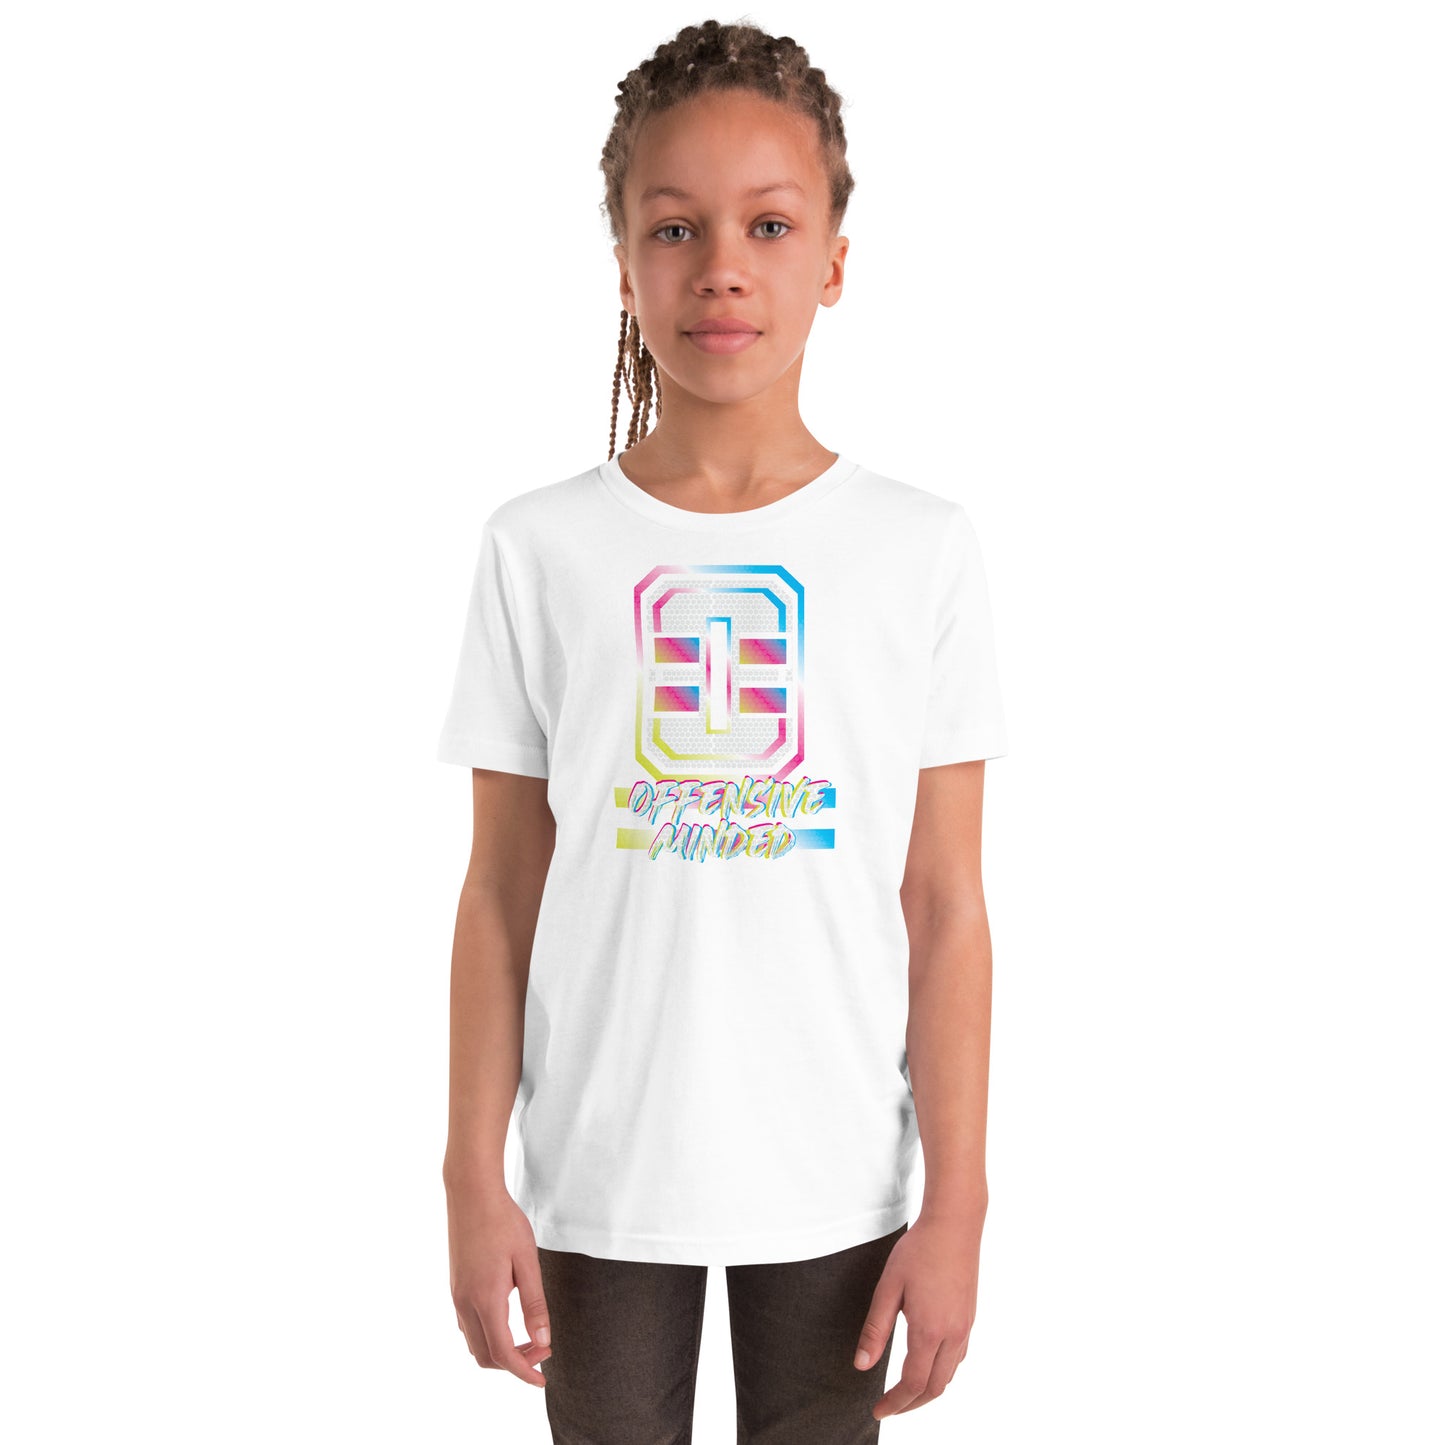 OM Hype Home Youth Short Sleeve T-Shirt